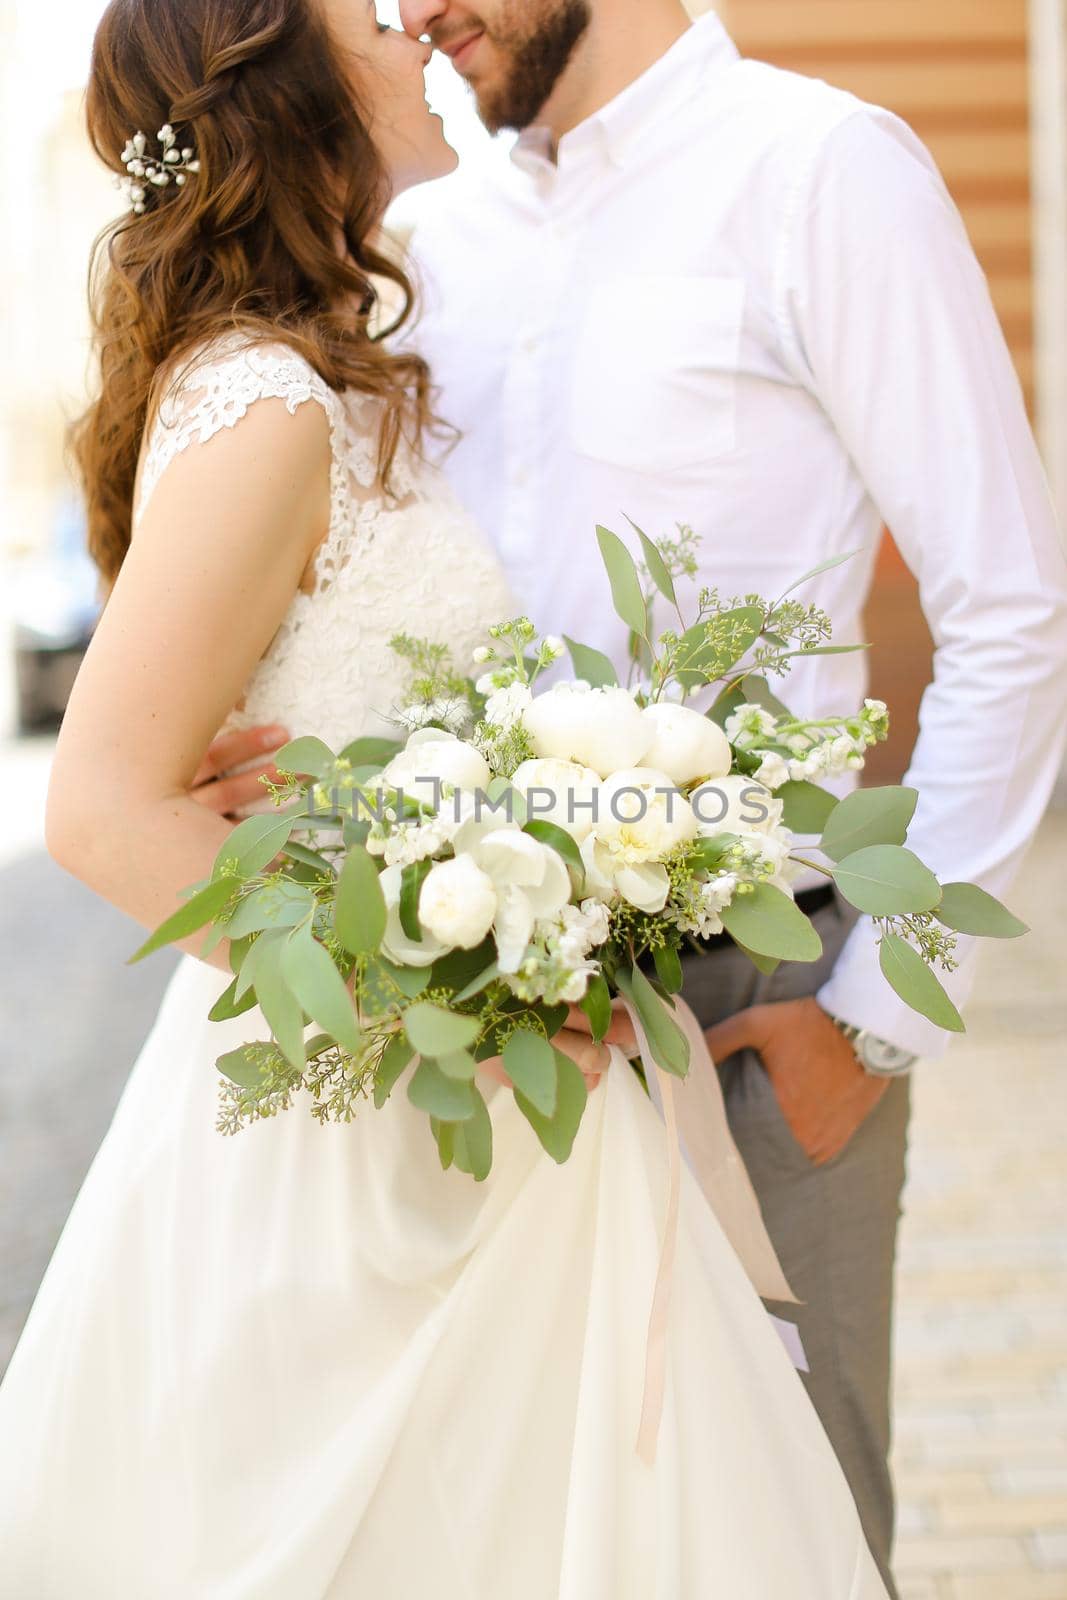 Happy caucasian groom hugging bride keeping flowers and wearing white dress. Concept of married couple and love, wedding photo session.